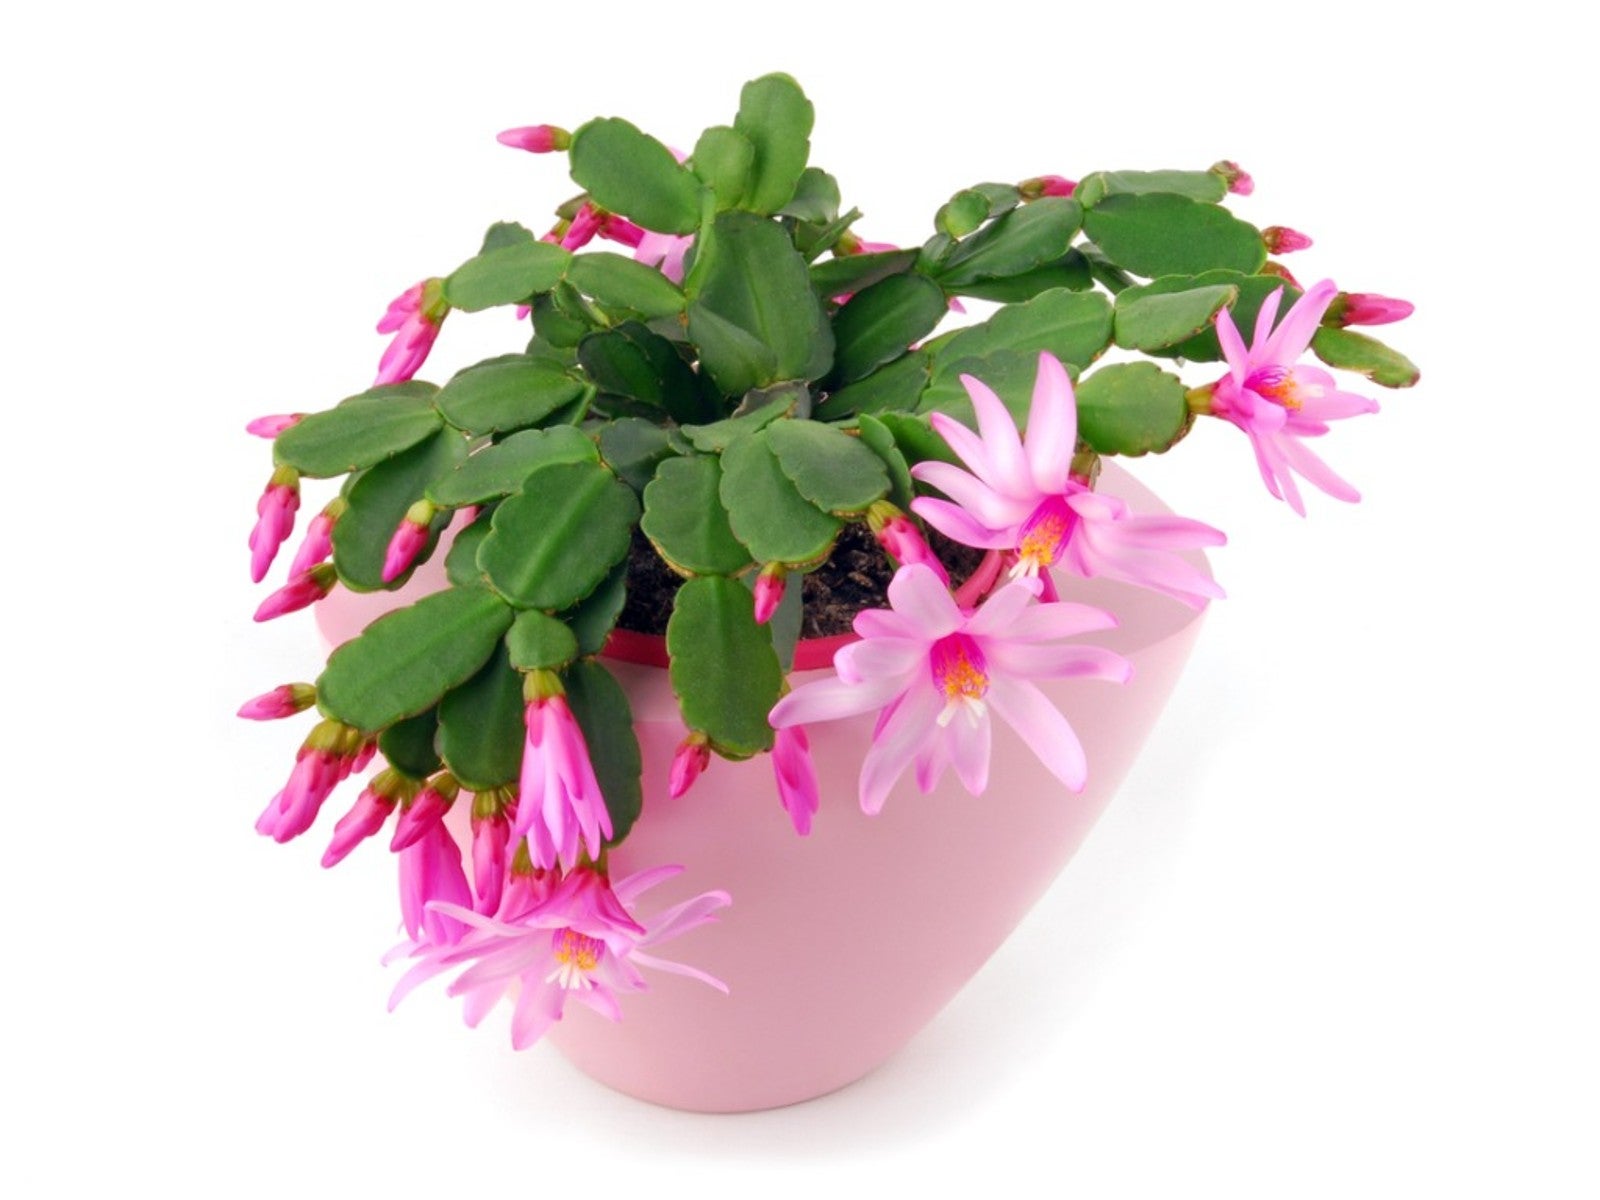 easter cactus leaves falling off and other common problems